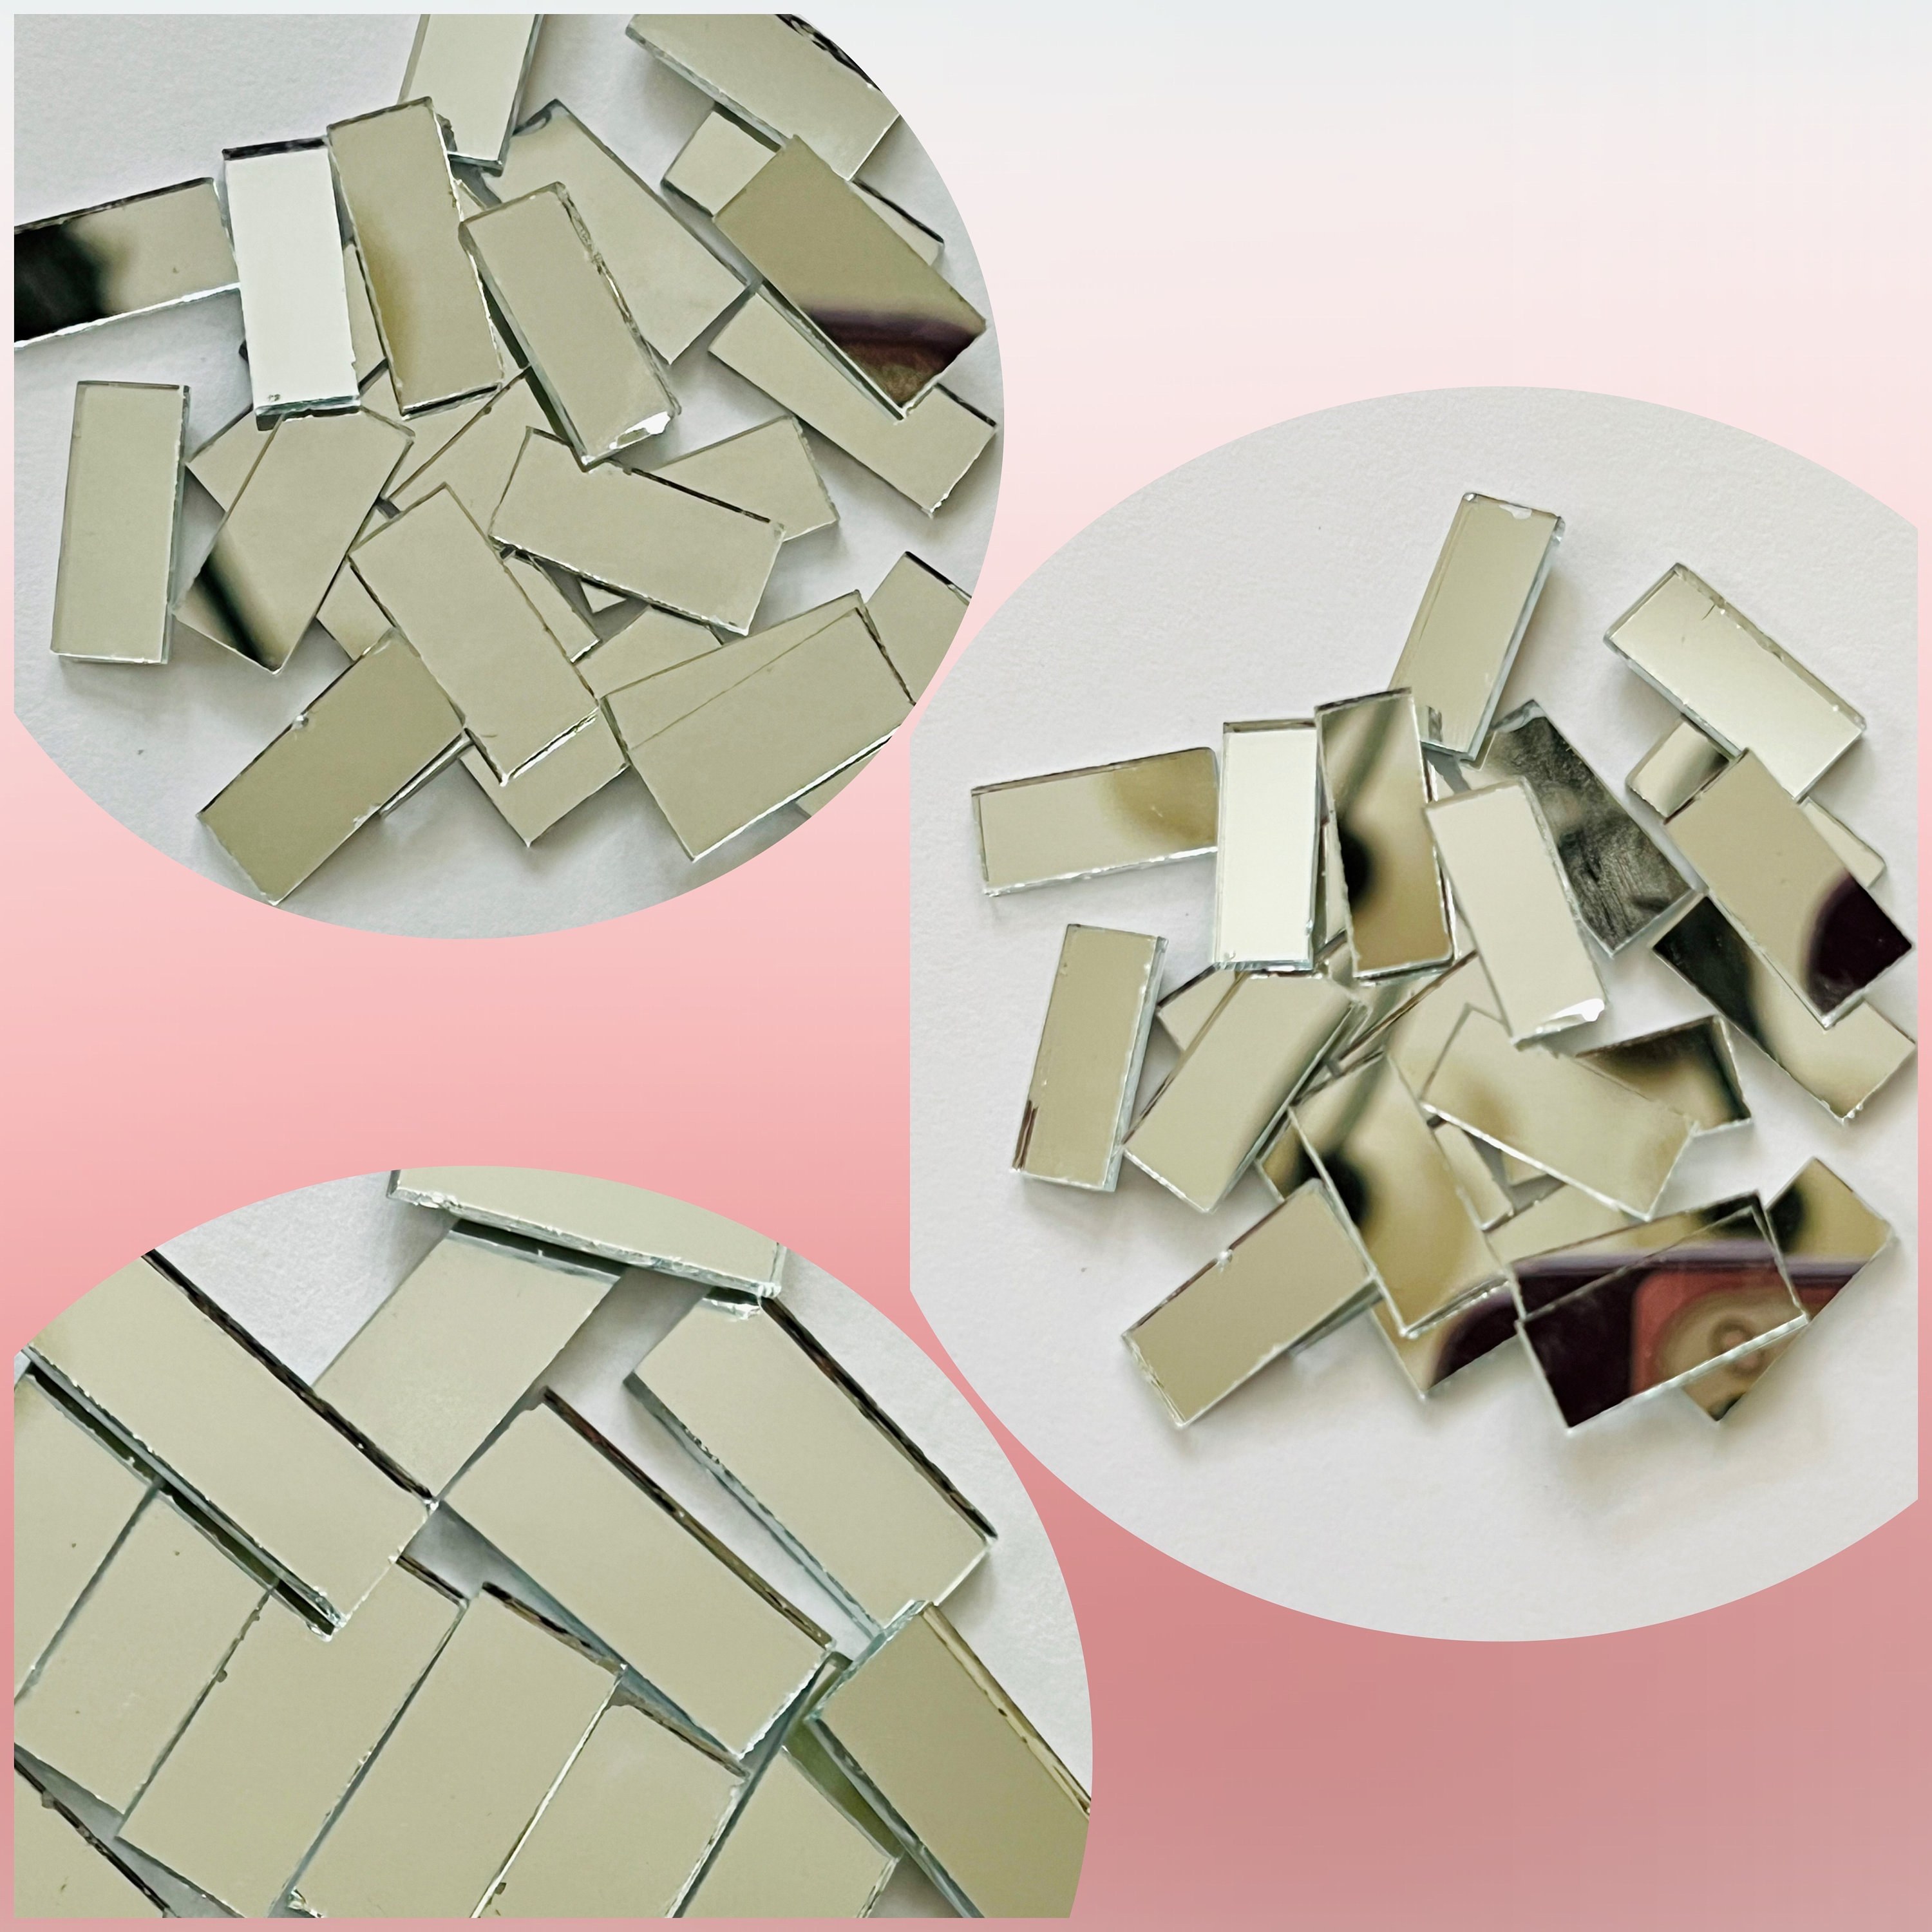 3 x 3 inch Glass Craft Small Square Mirrors 10 Pieces Mosaic Mirror Tiles